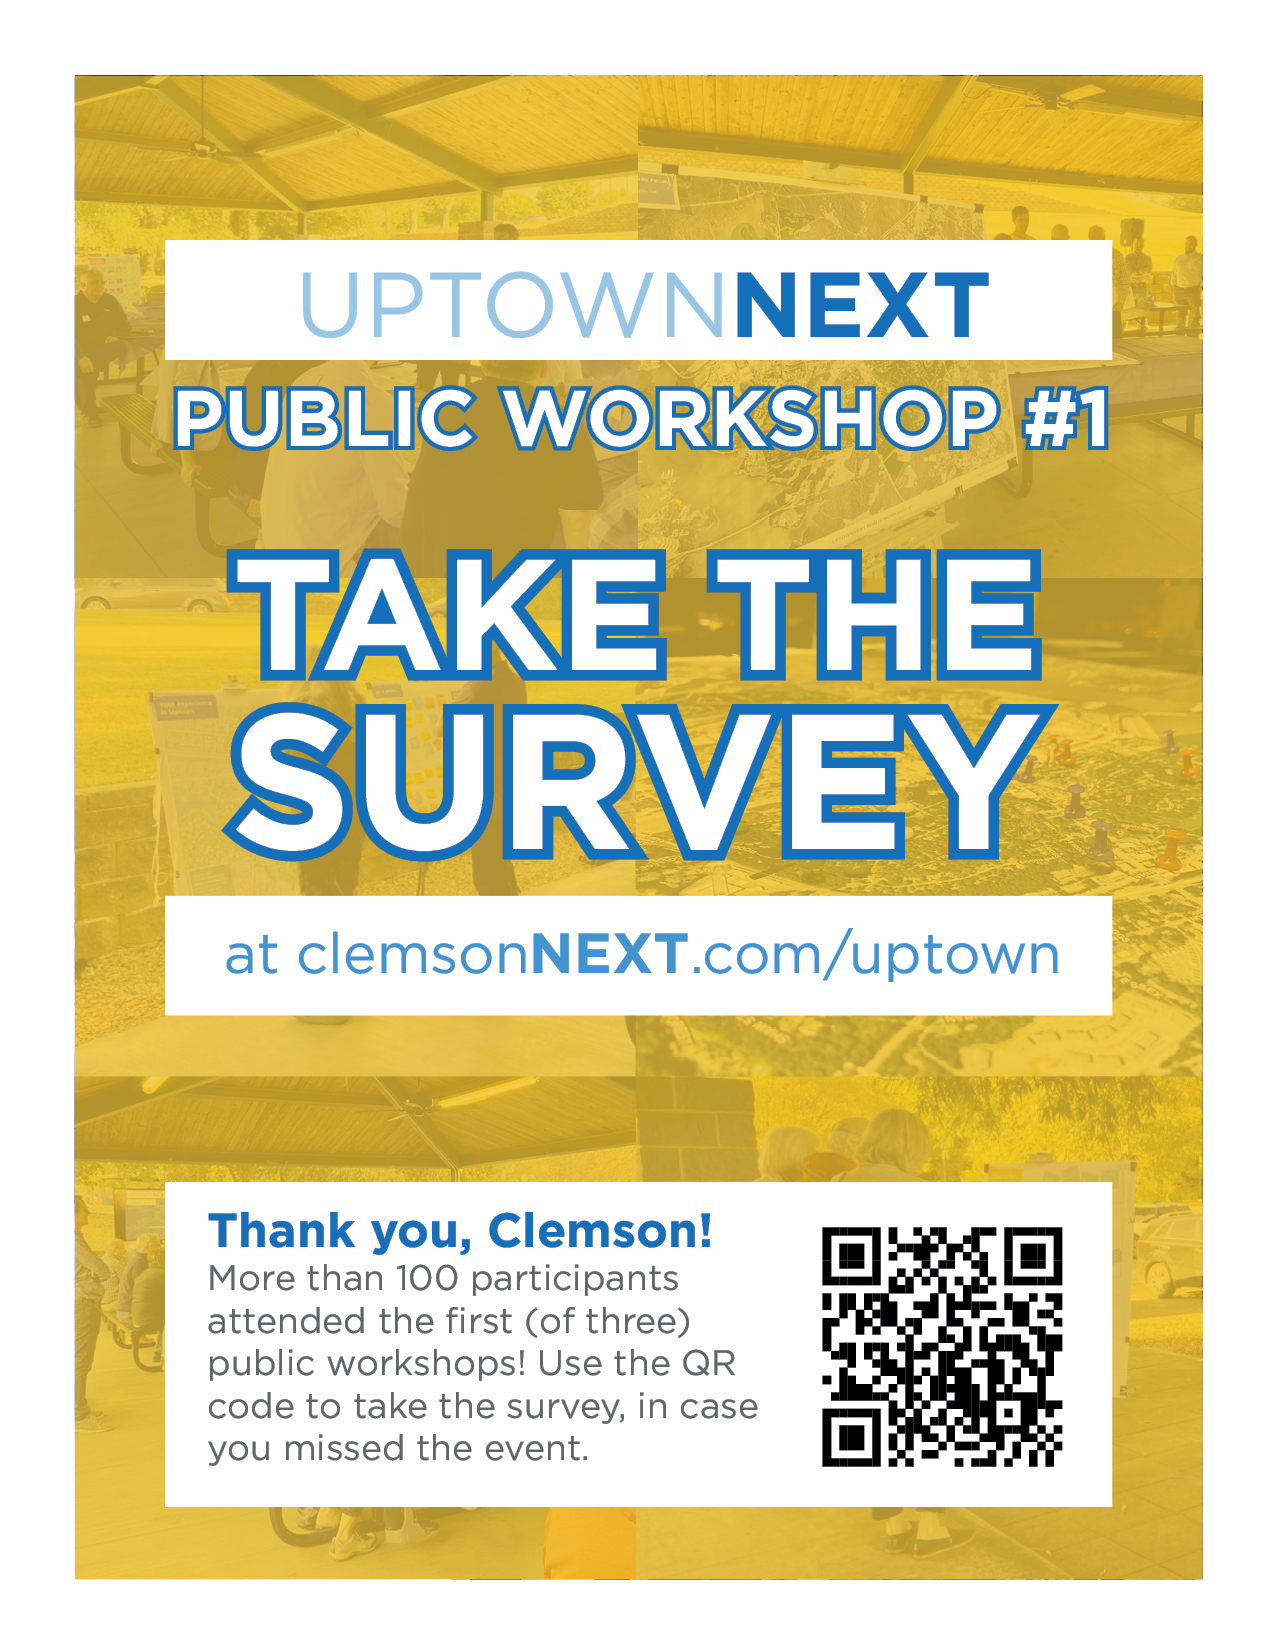 Click here to navigate to the UptownNext website and survey link.